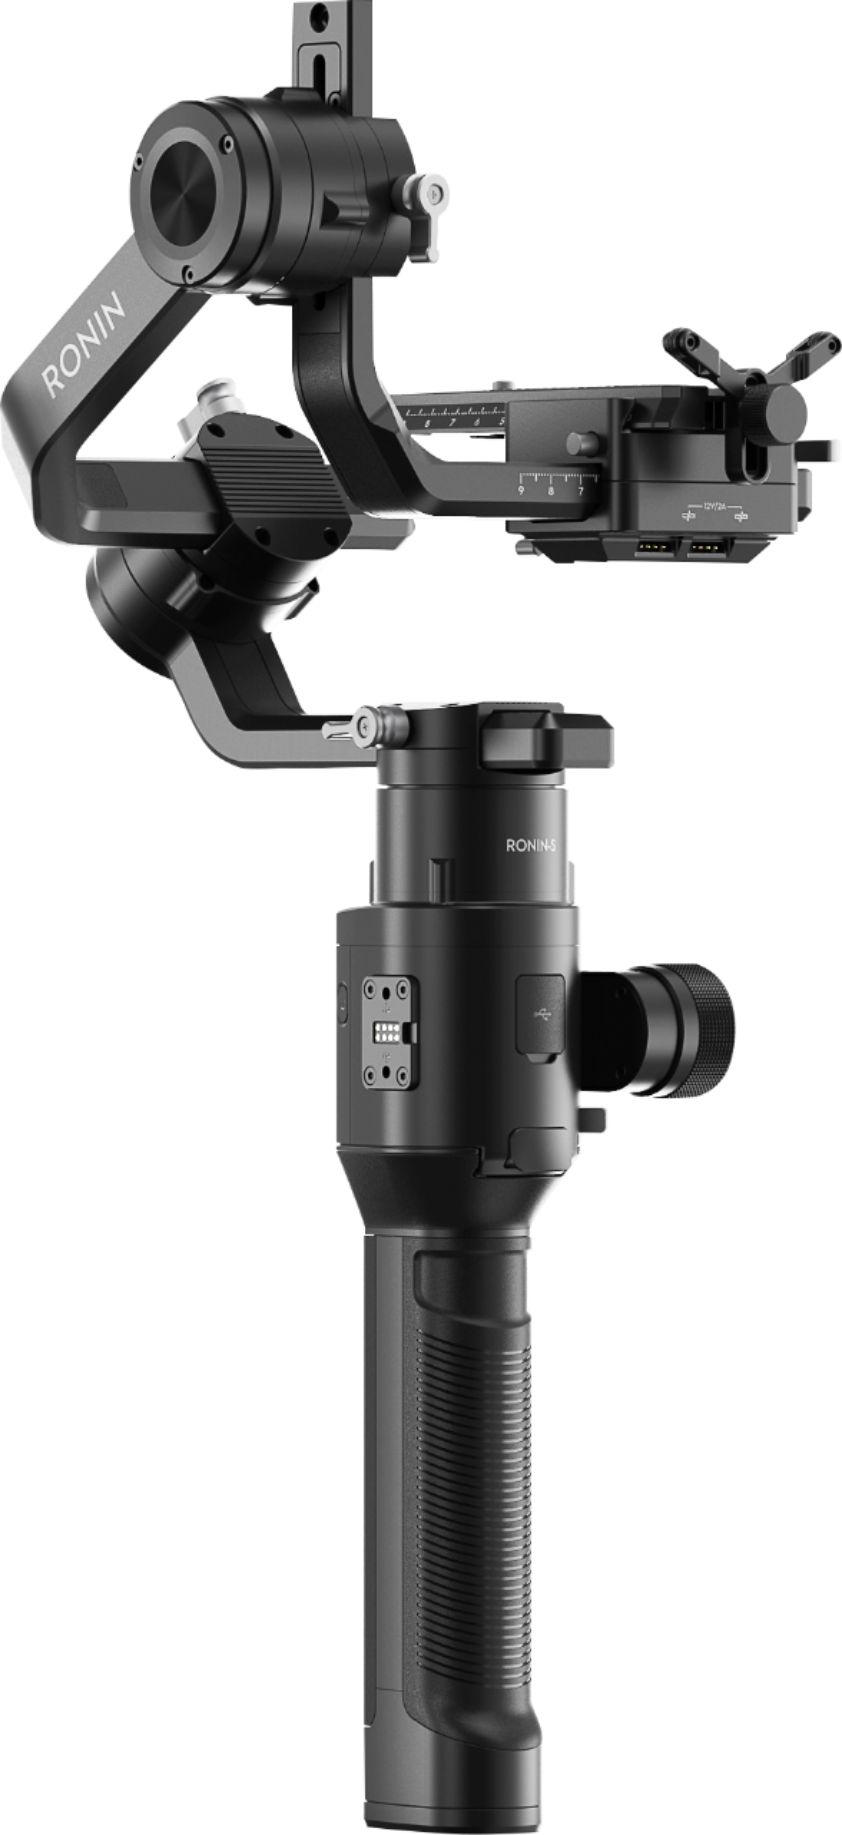 Angle View: DJI - Ronin-S Handheld Gimbal Stabilizer for DSLR and Mirrorless Cameras